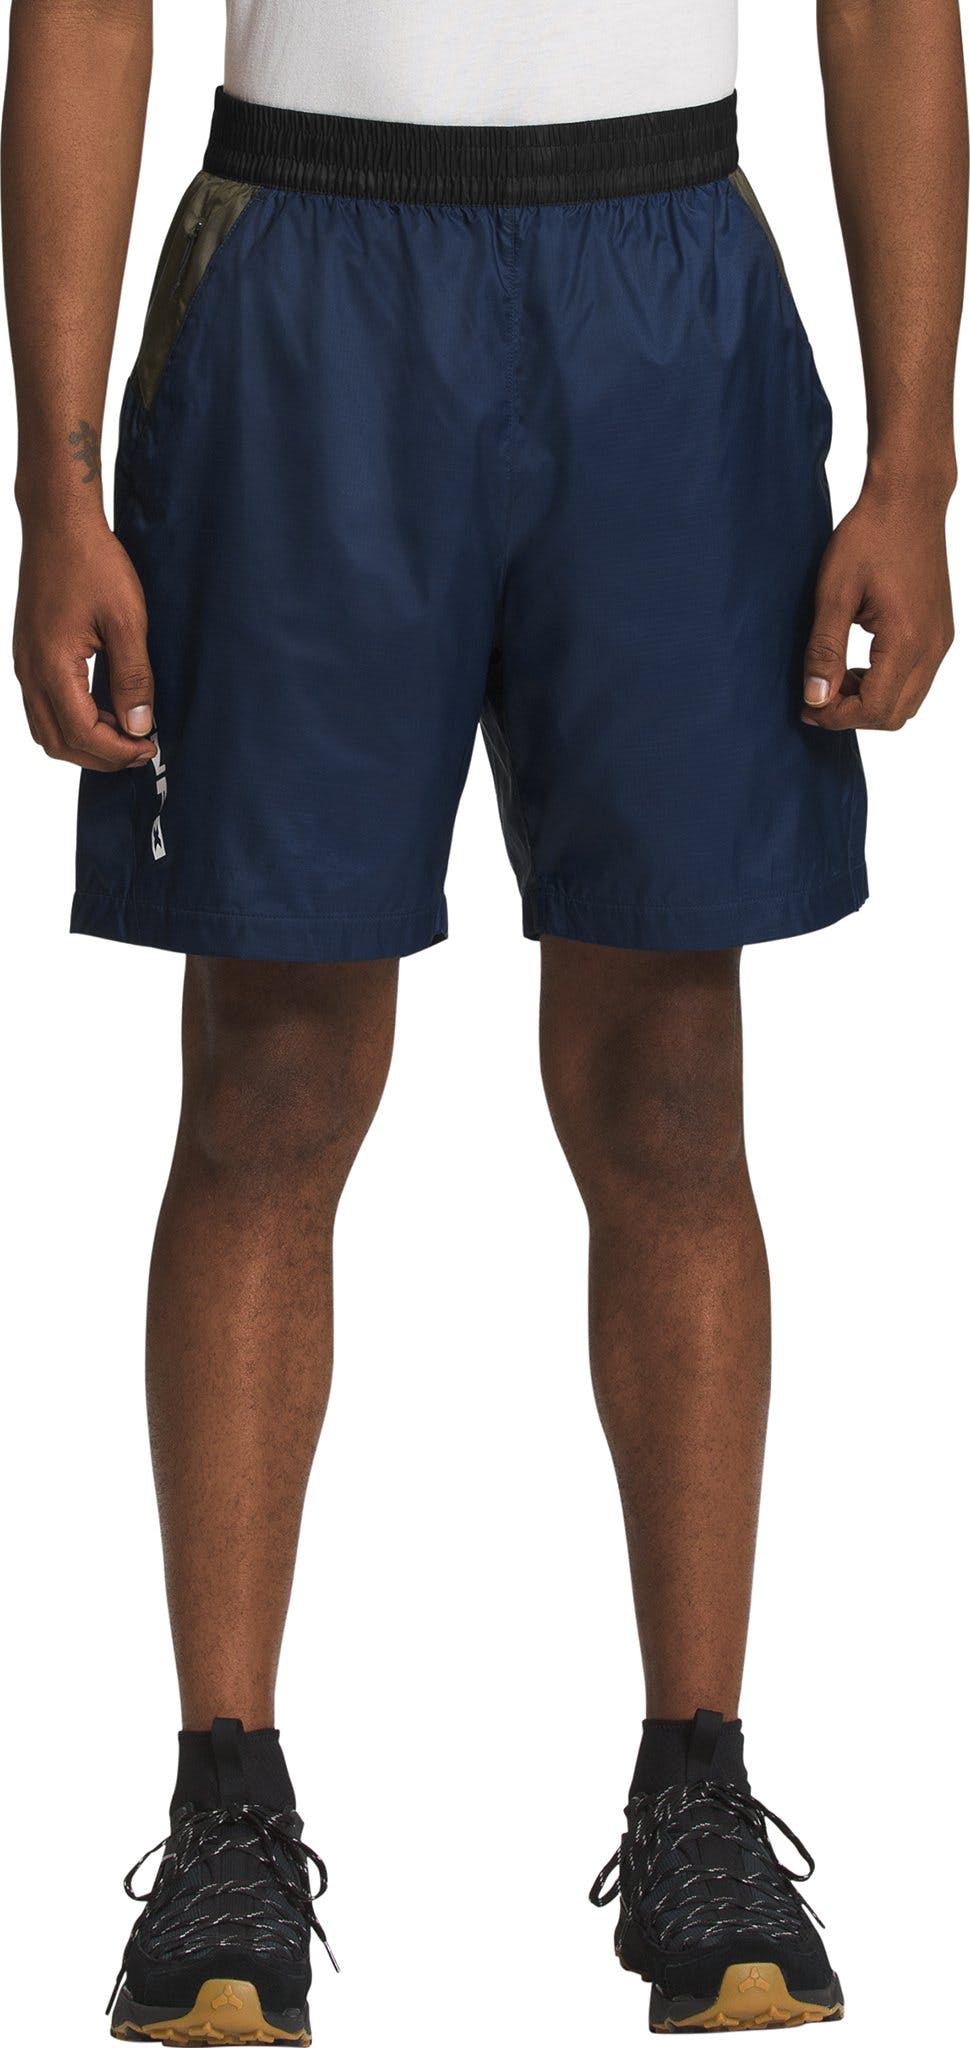 Product image for TNF X Shorts - Men’s